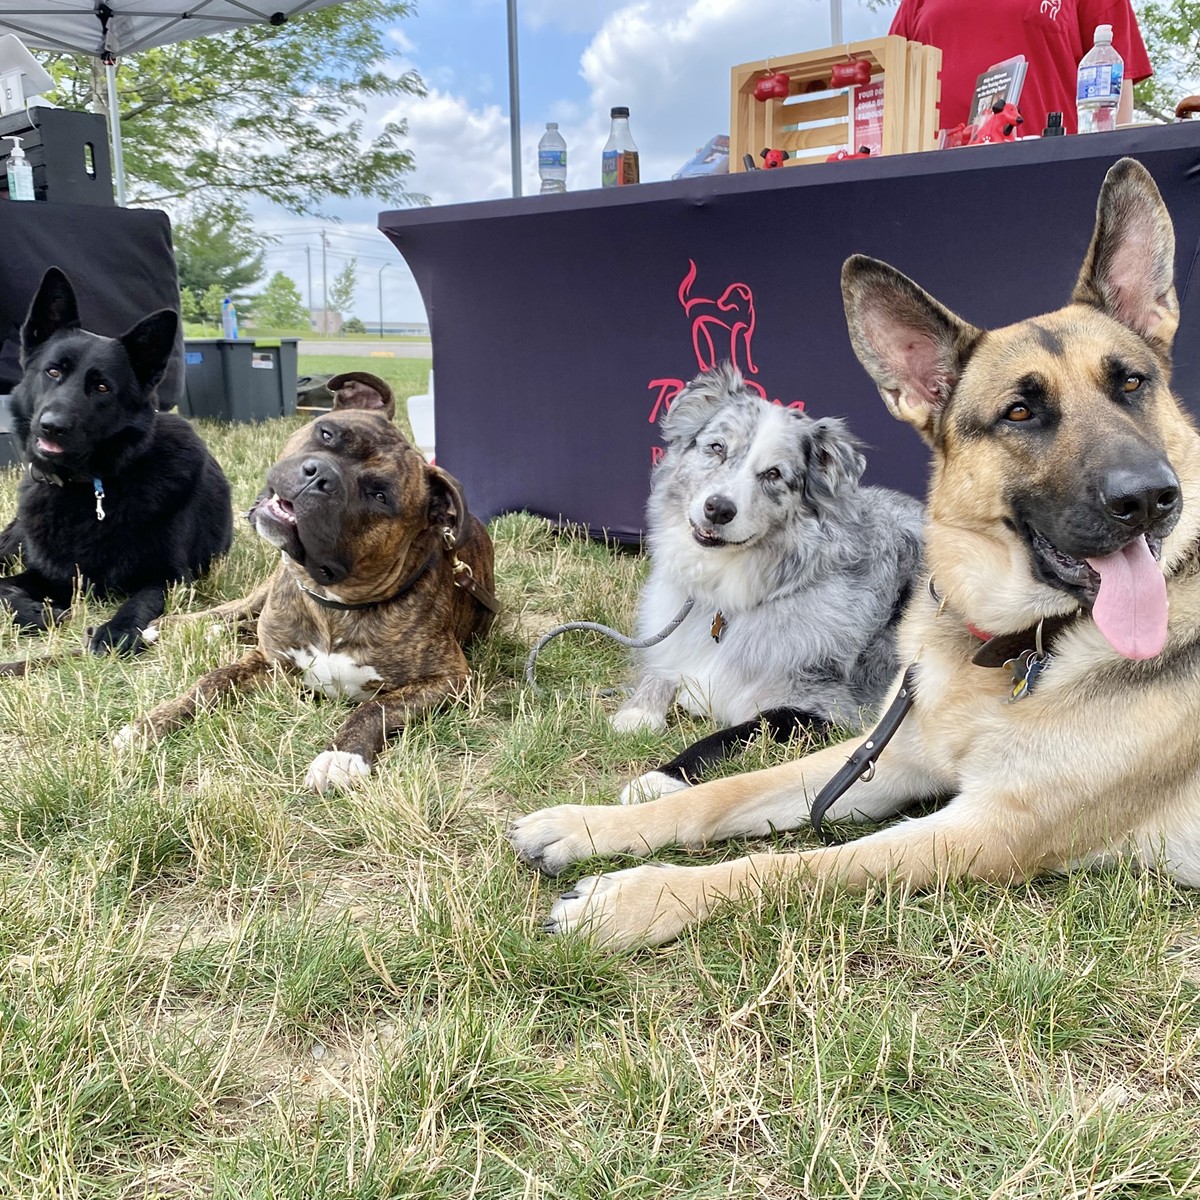 Some good dogs taking a break from shopping!